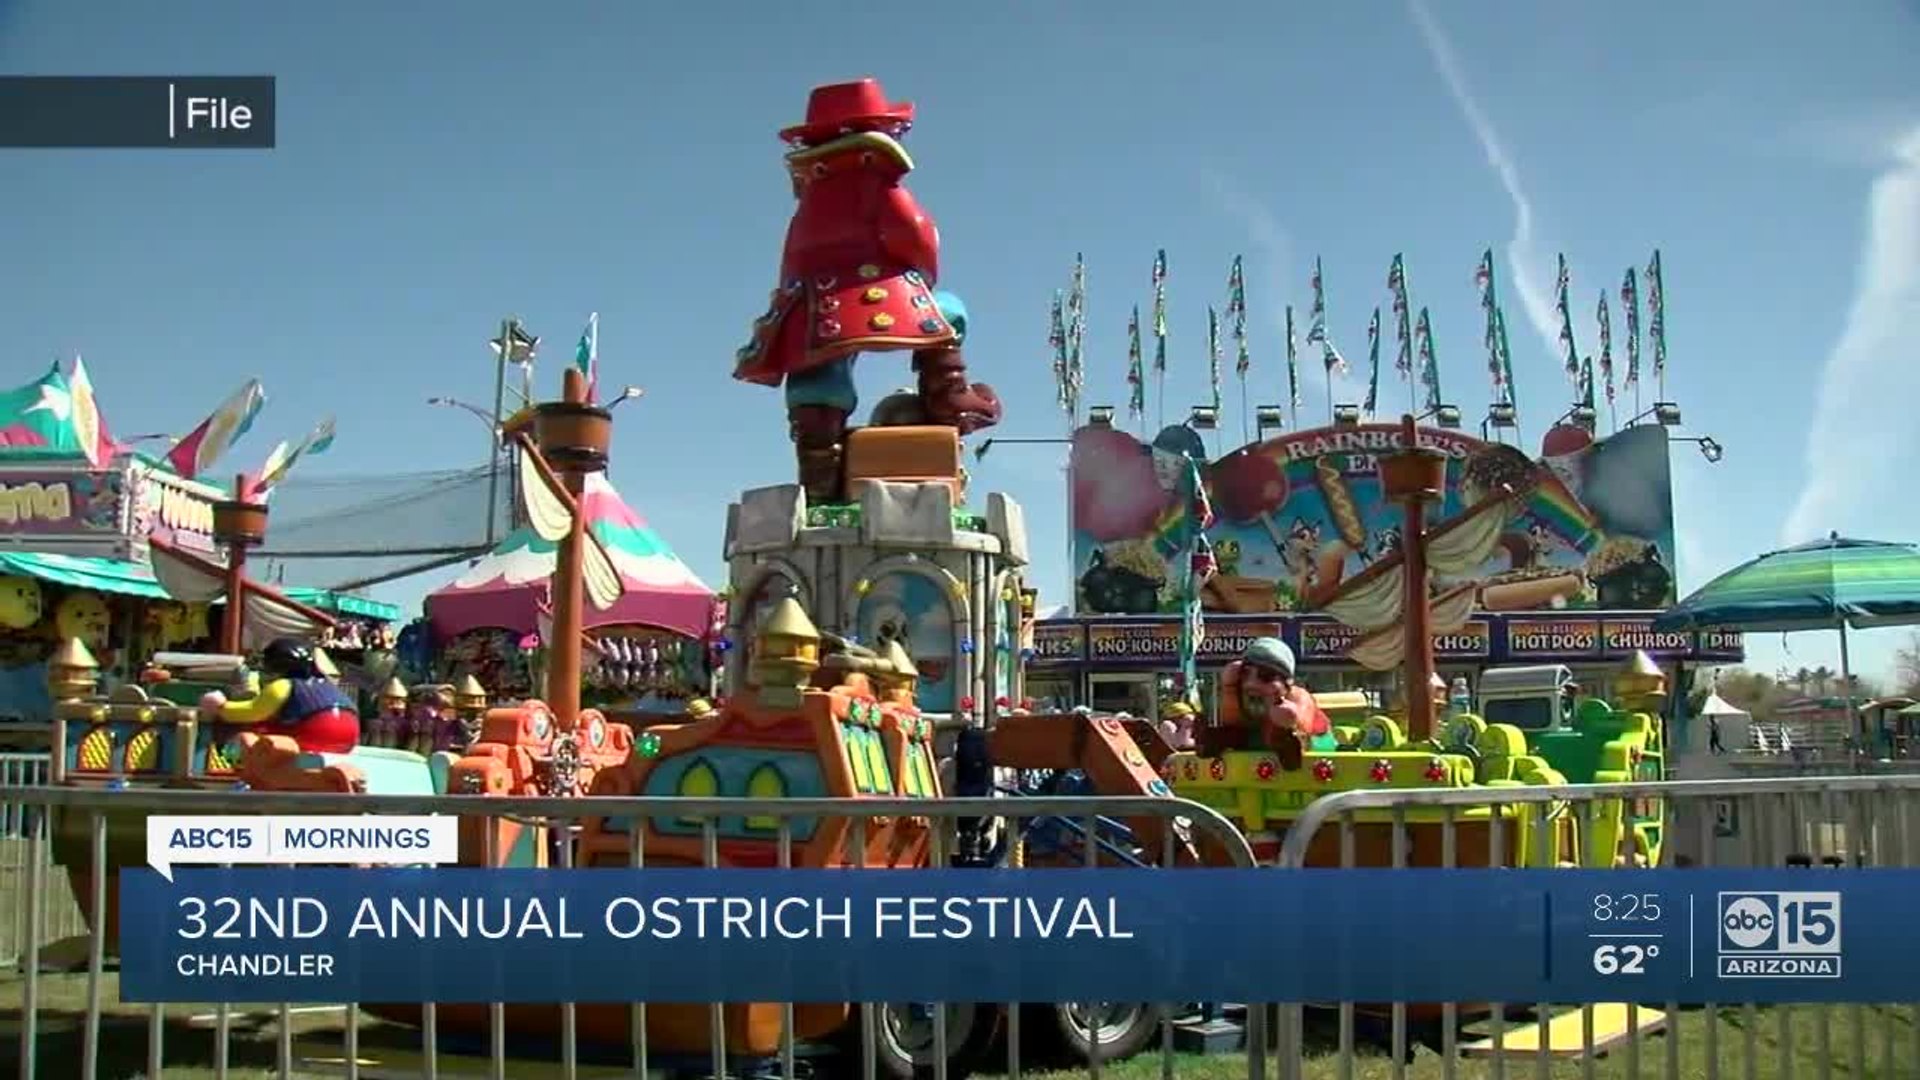 Head out to the 32nd annual Ostrich Festival